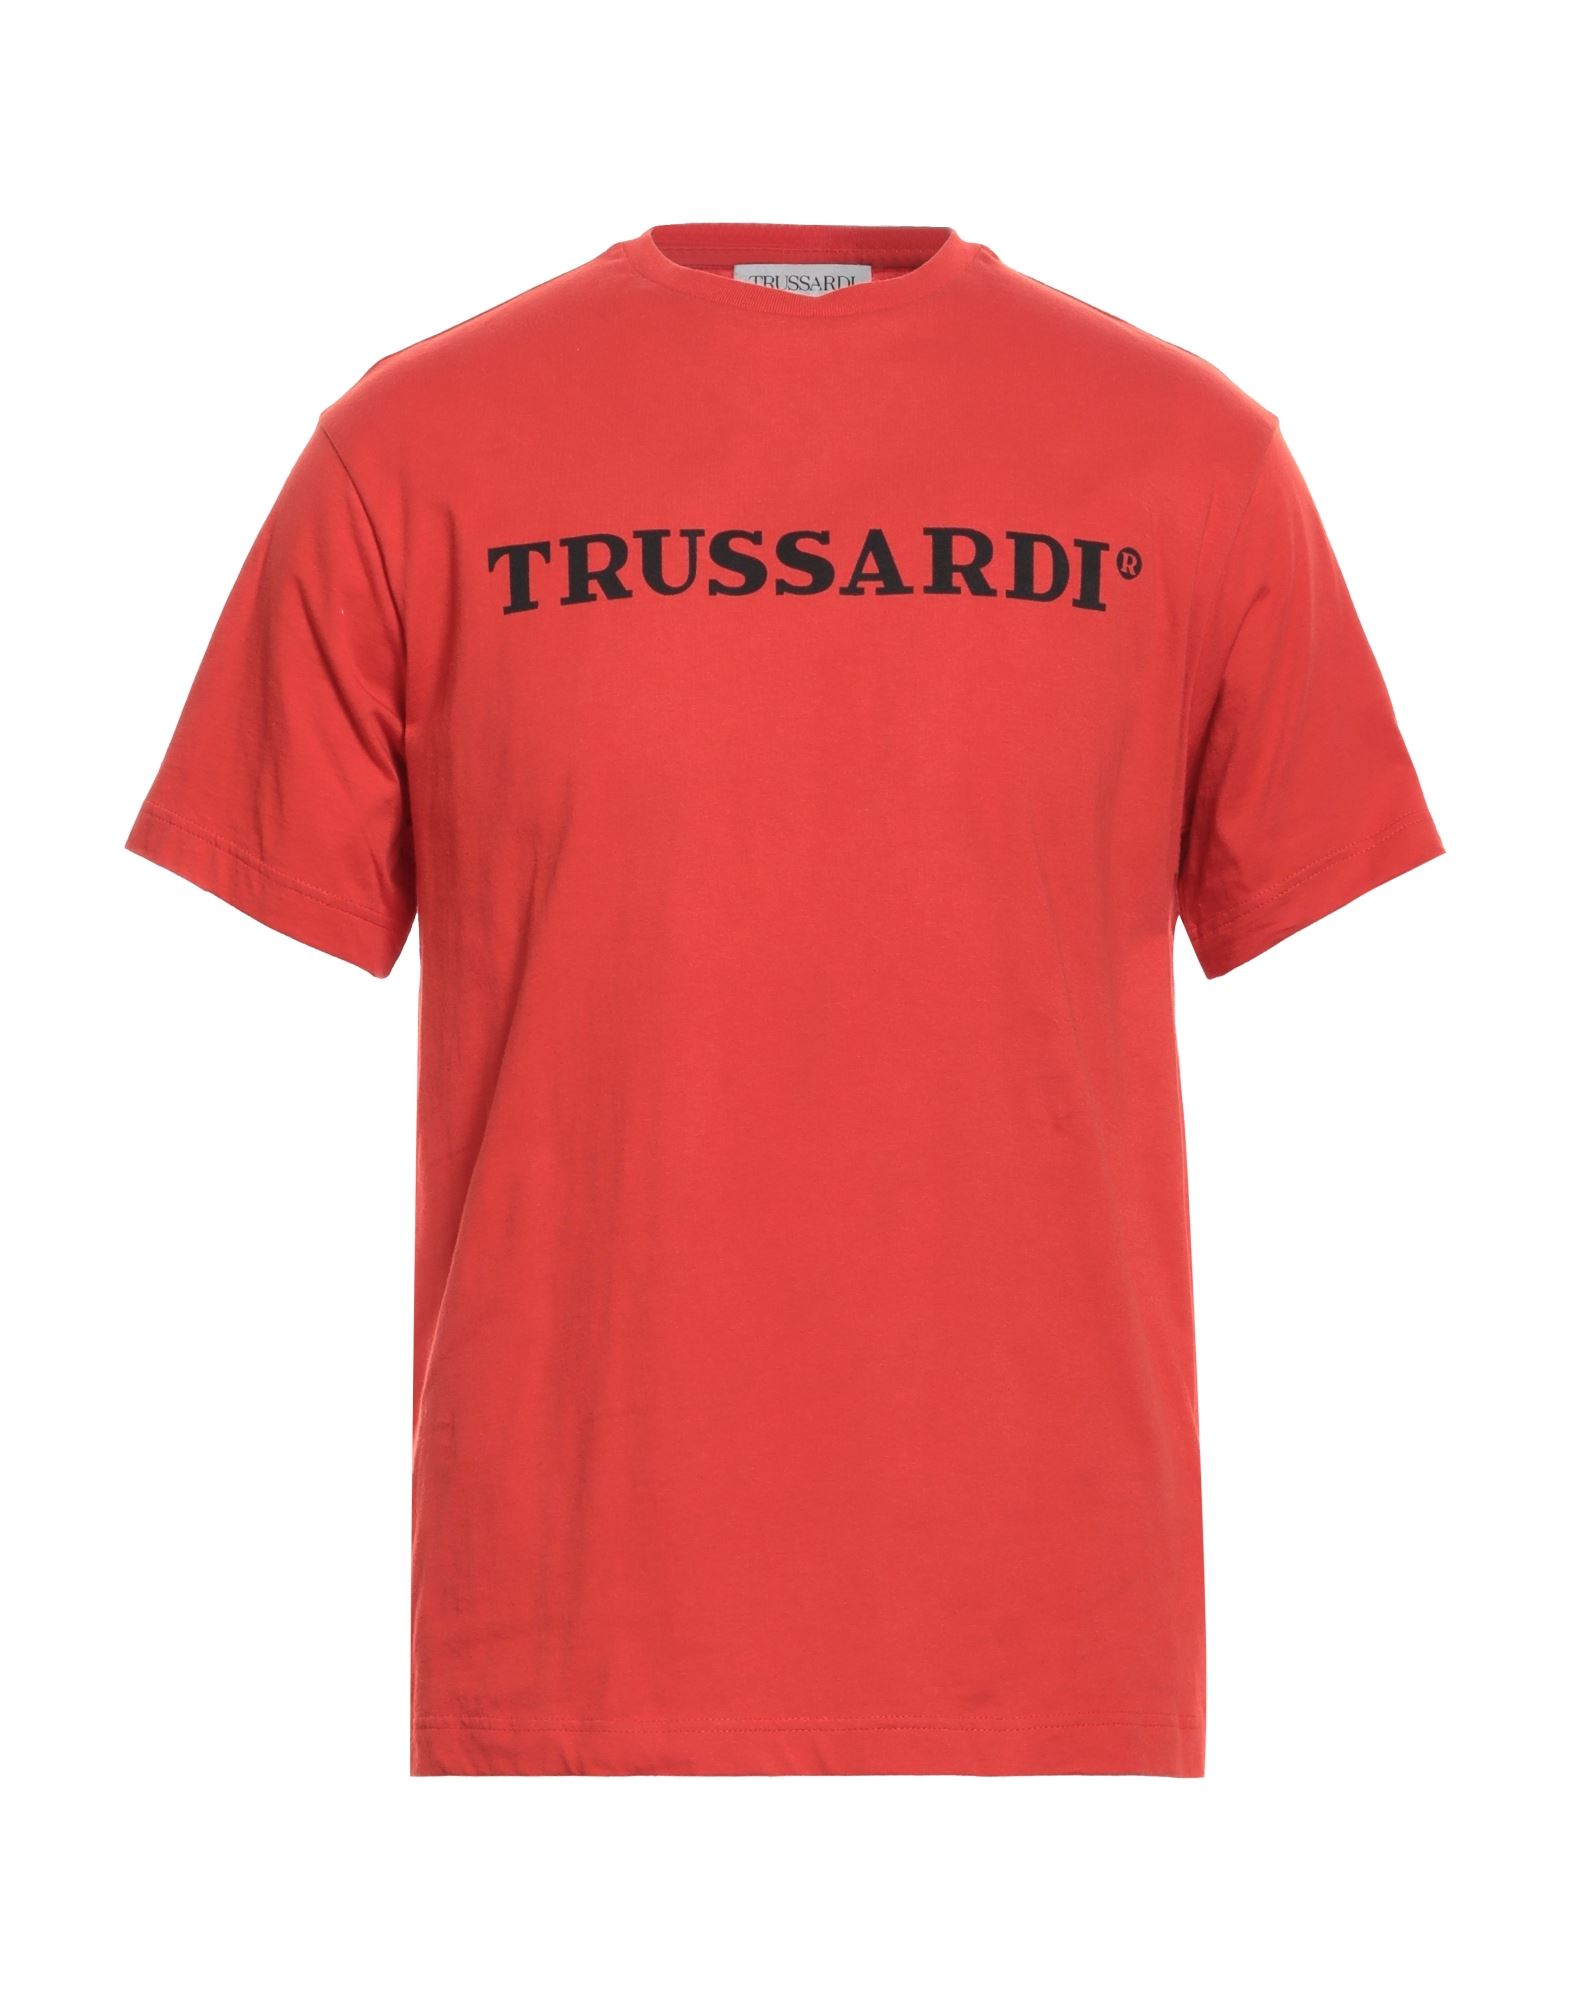 Trussardi T-shirts In Tomato Red